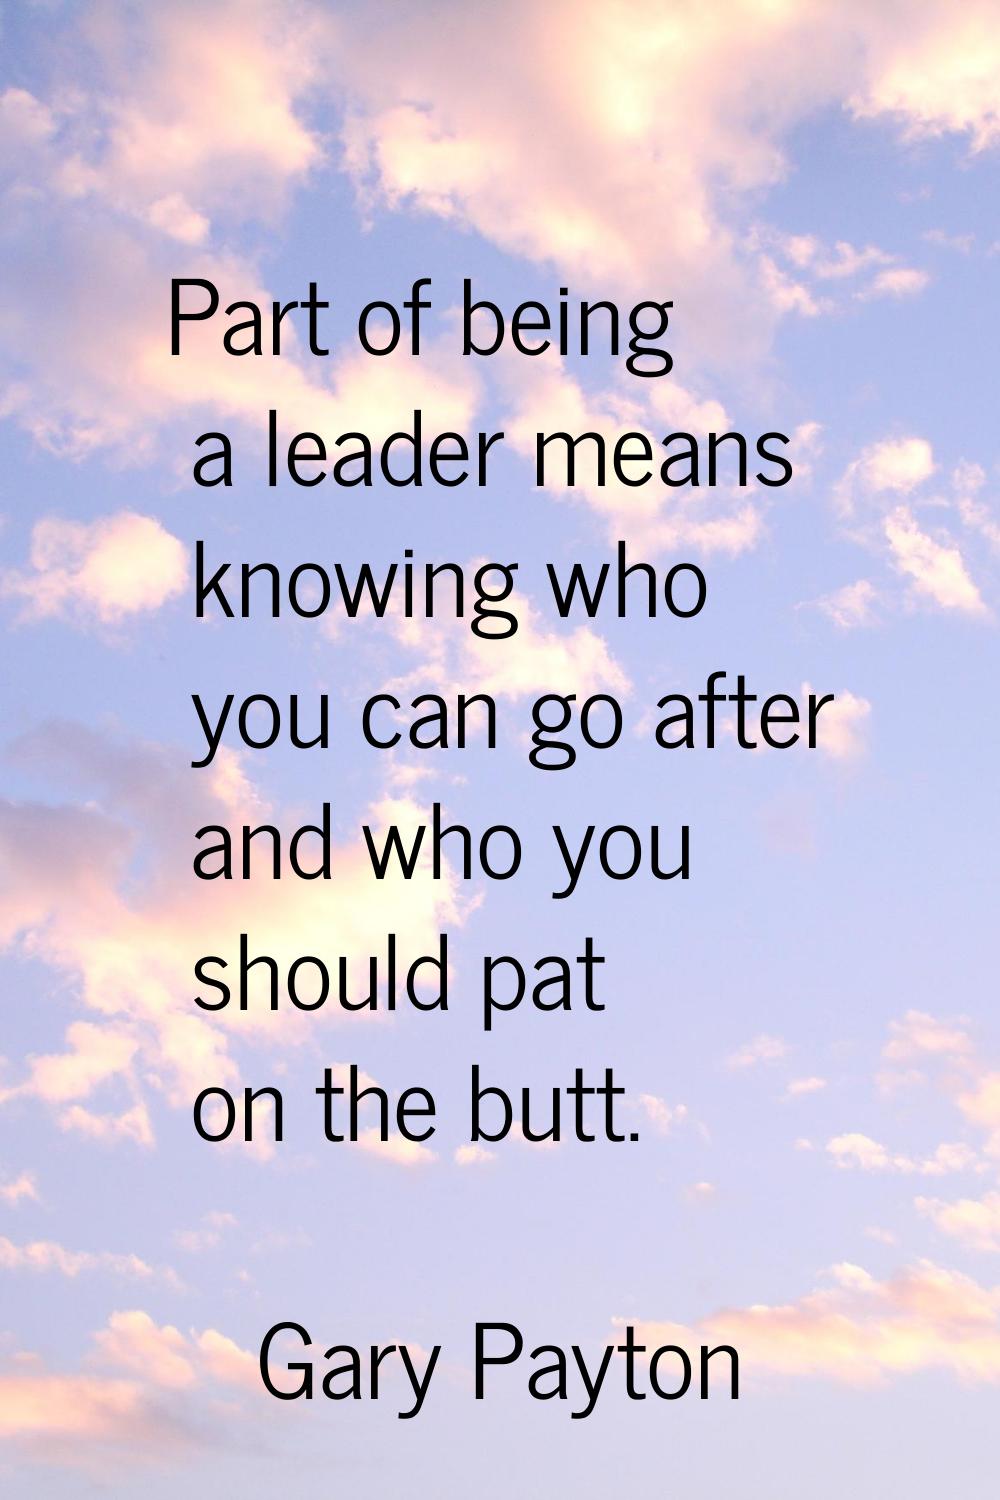 Part of being a leader means knowing who you can go after and who you should pat on the butt.